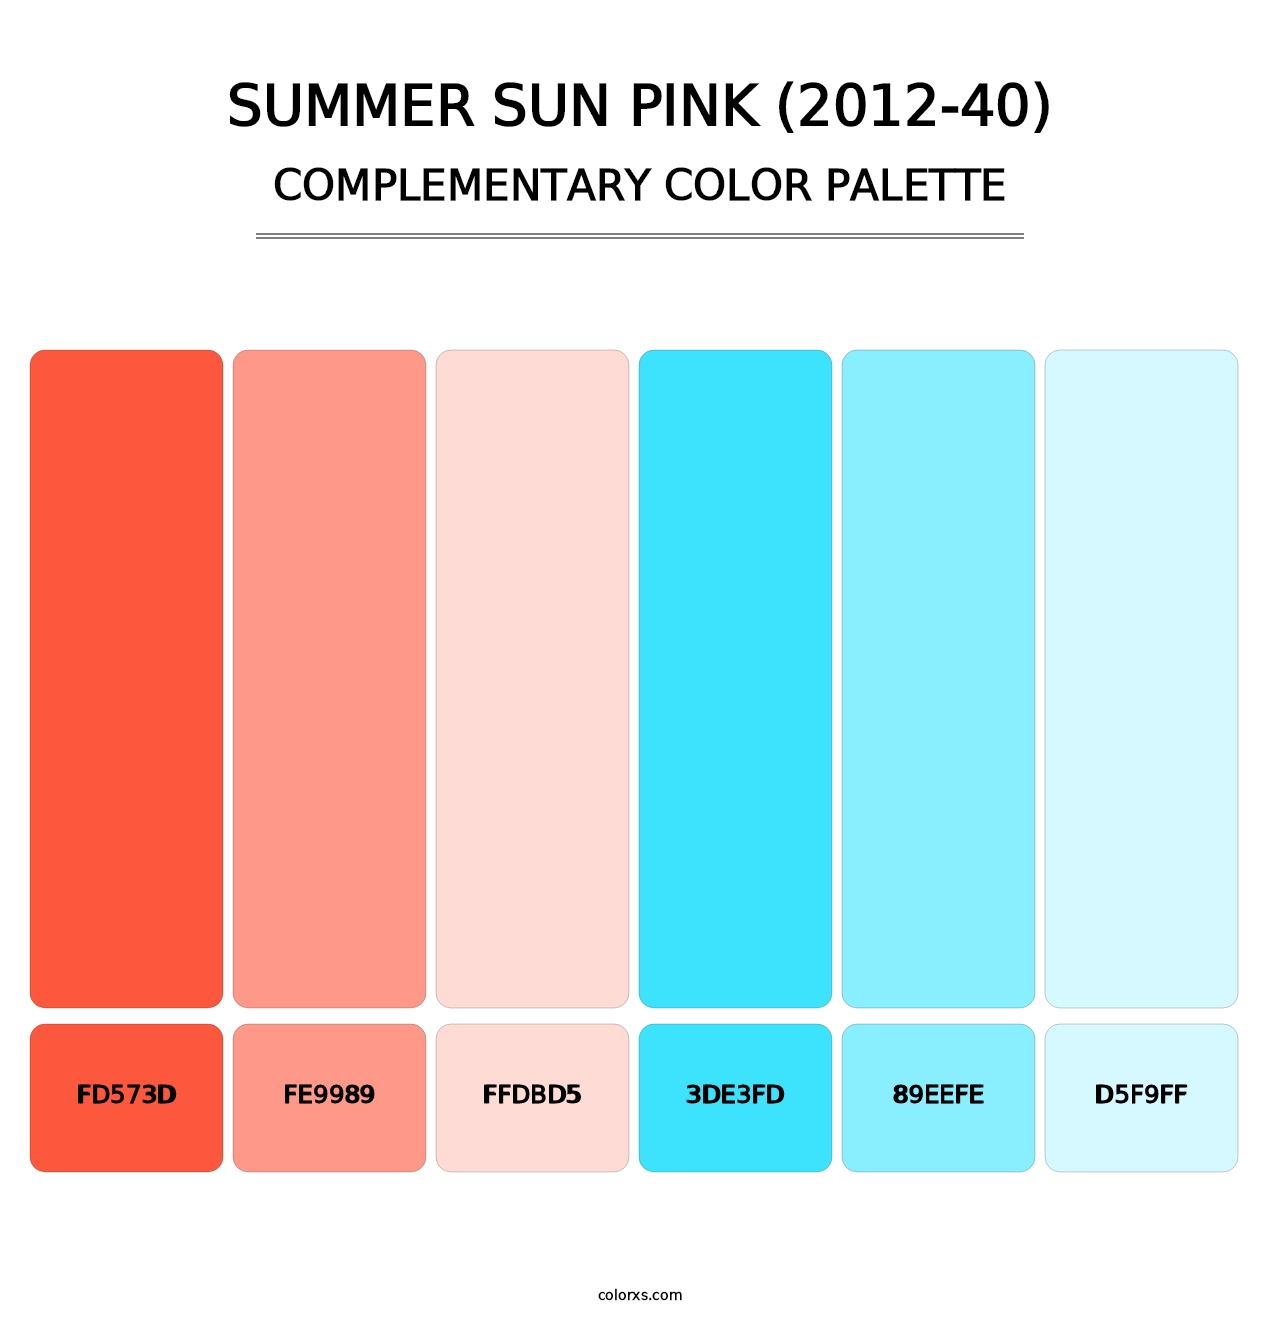 Summer Sun Pink (2012-40) - Complementary Color Palette